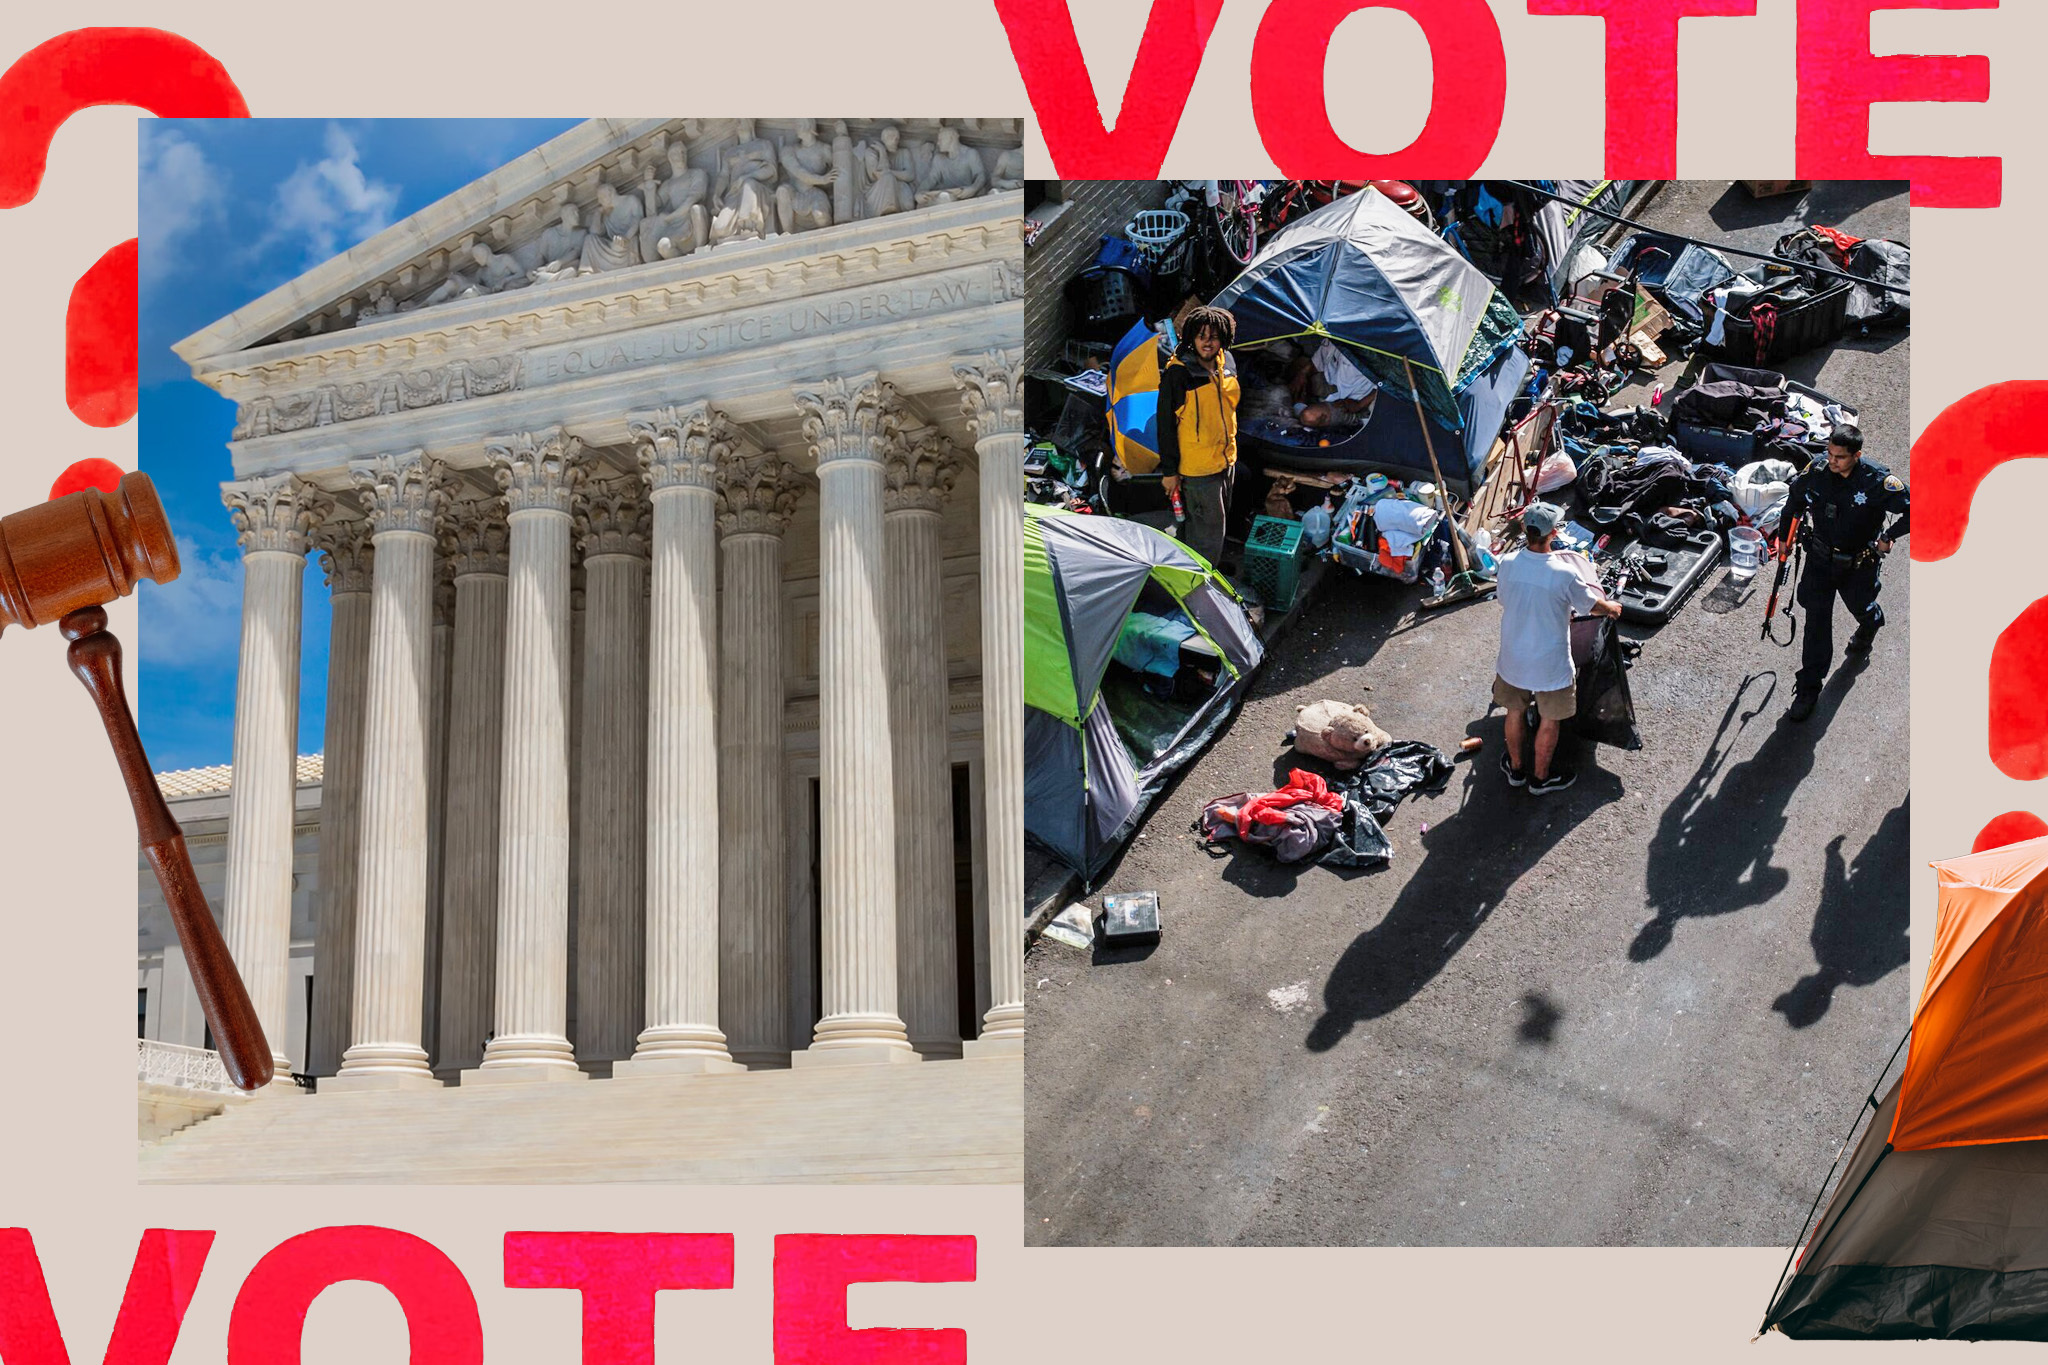 The image depicts a split scene with the Supreme Court building on the left, and a tent encampment with people and belongings on the right, with the word "VOTE" in bold red letters.